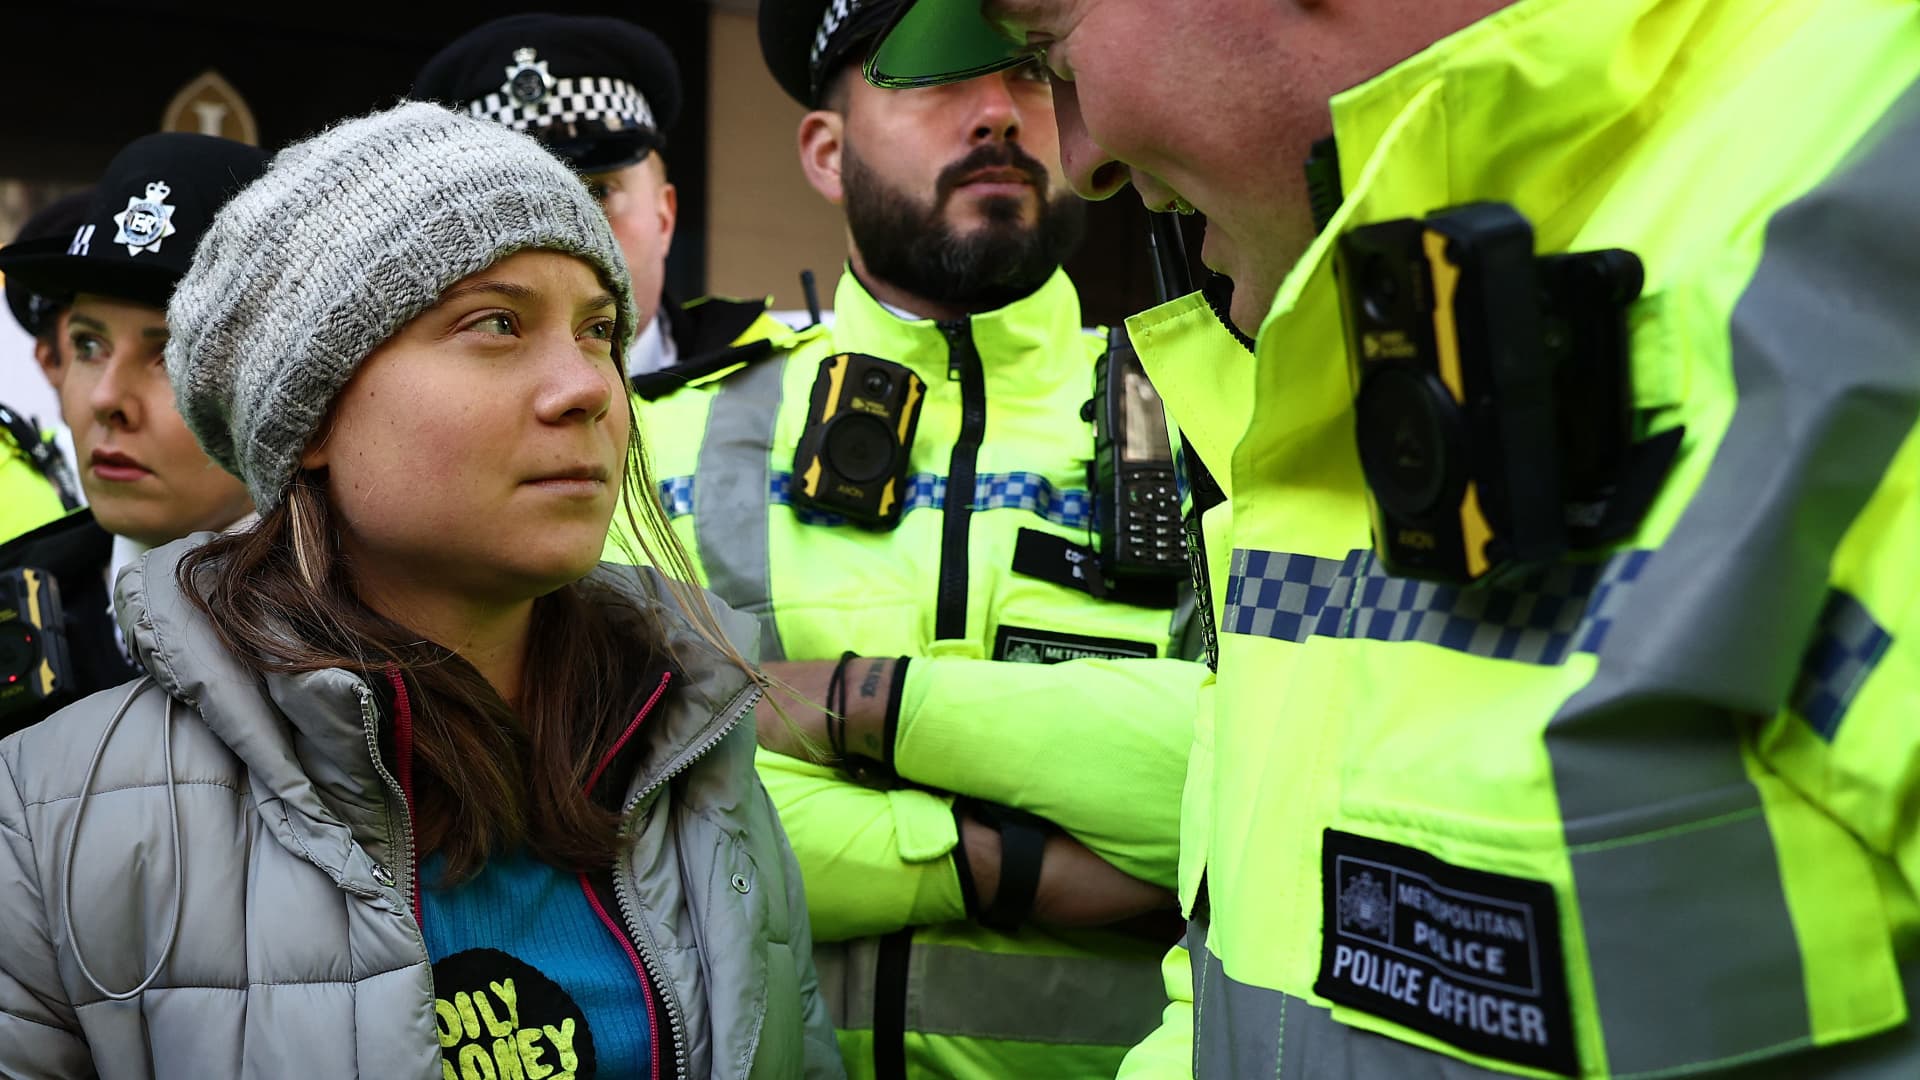 Native climate activist Greta Thunberg arrested at London convey disrupting necessary oil conference